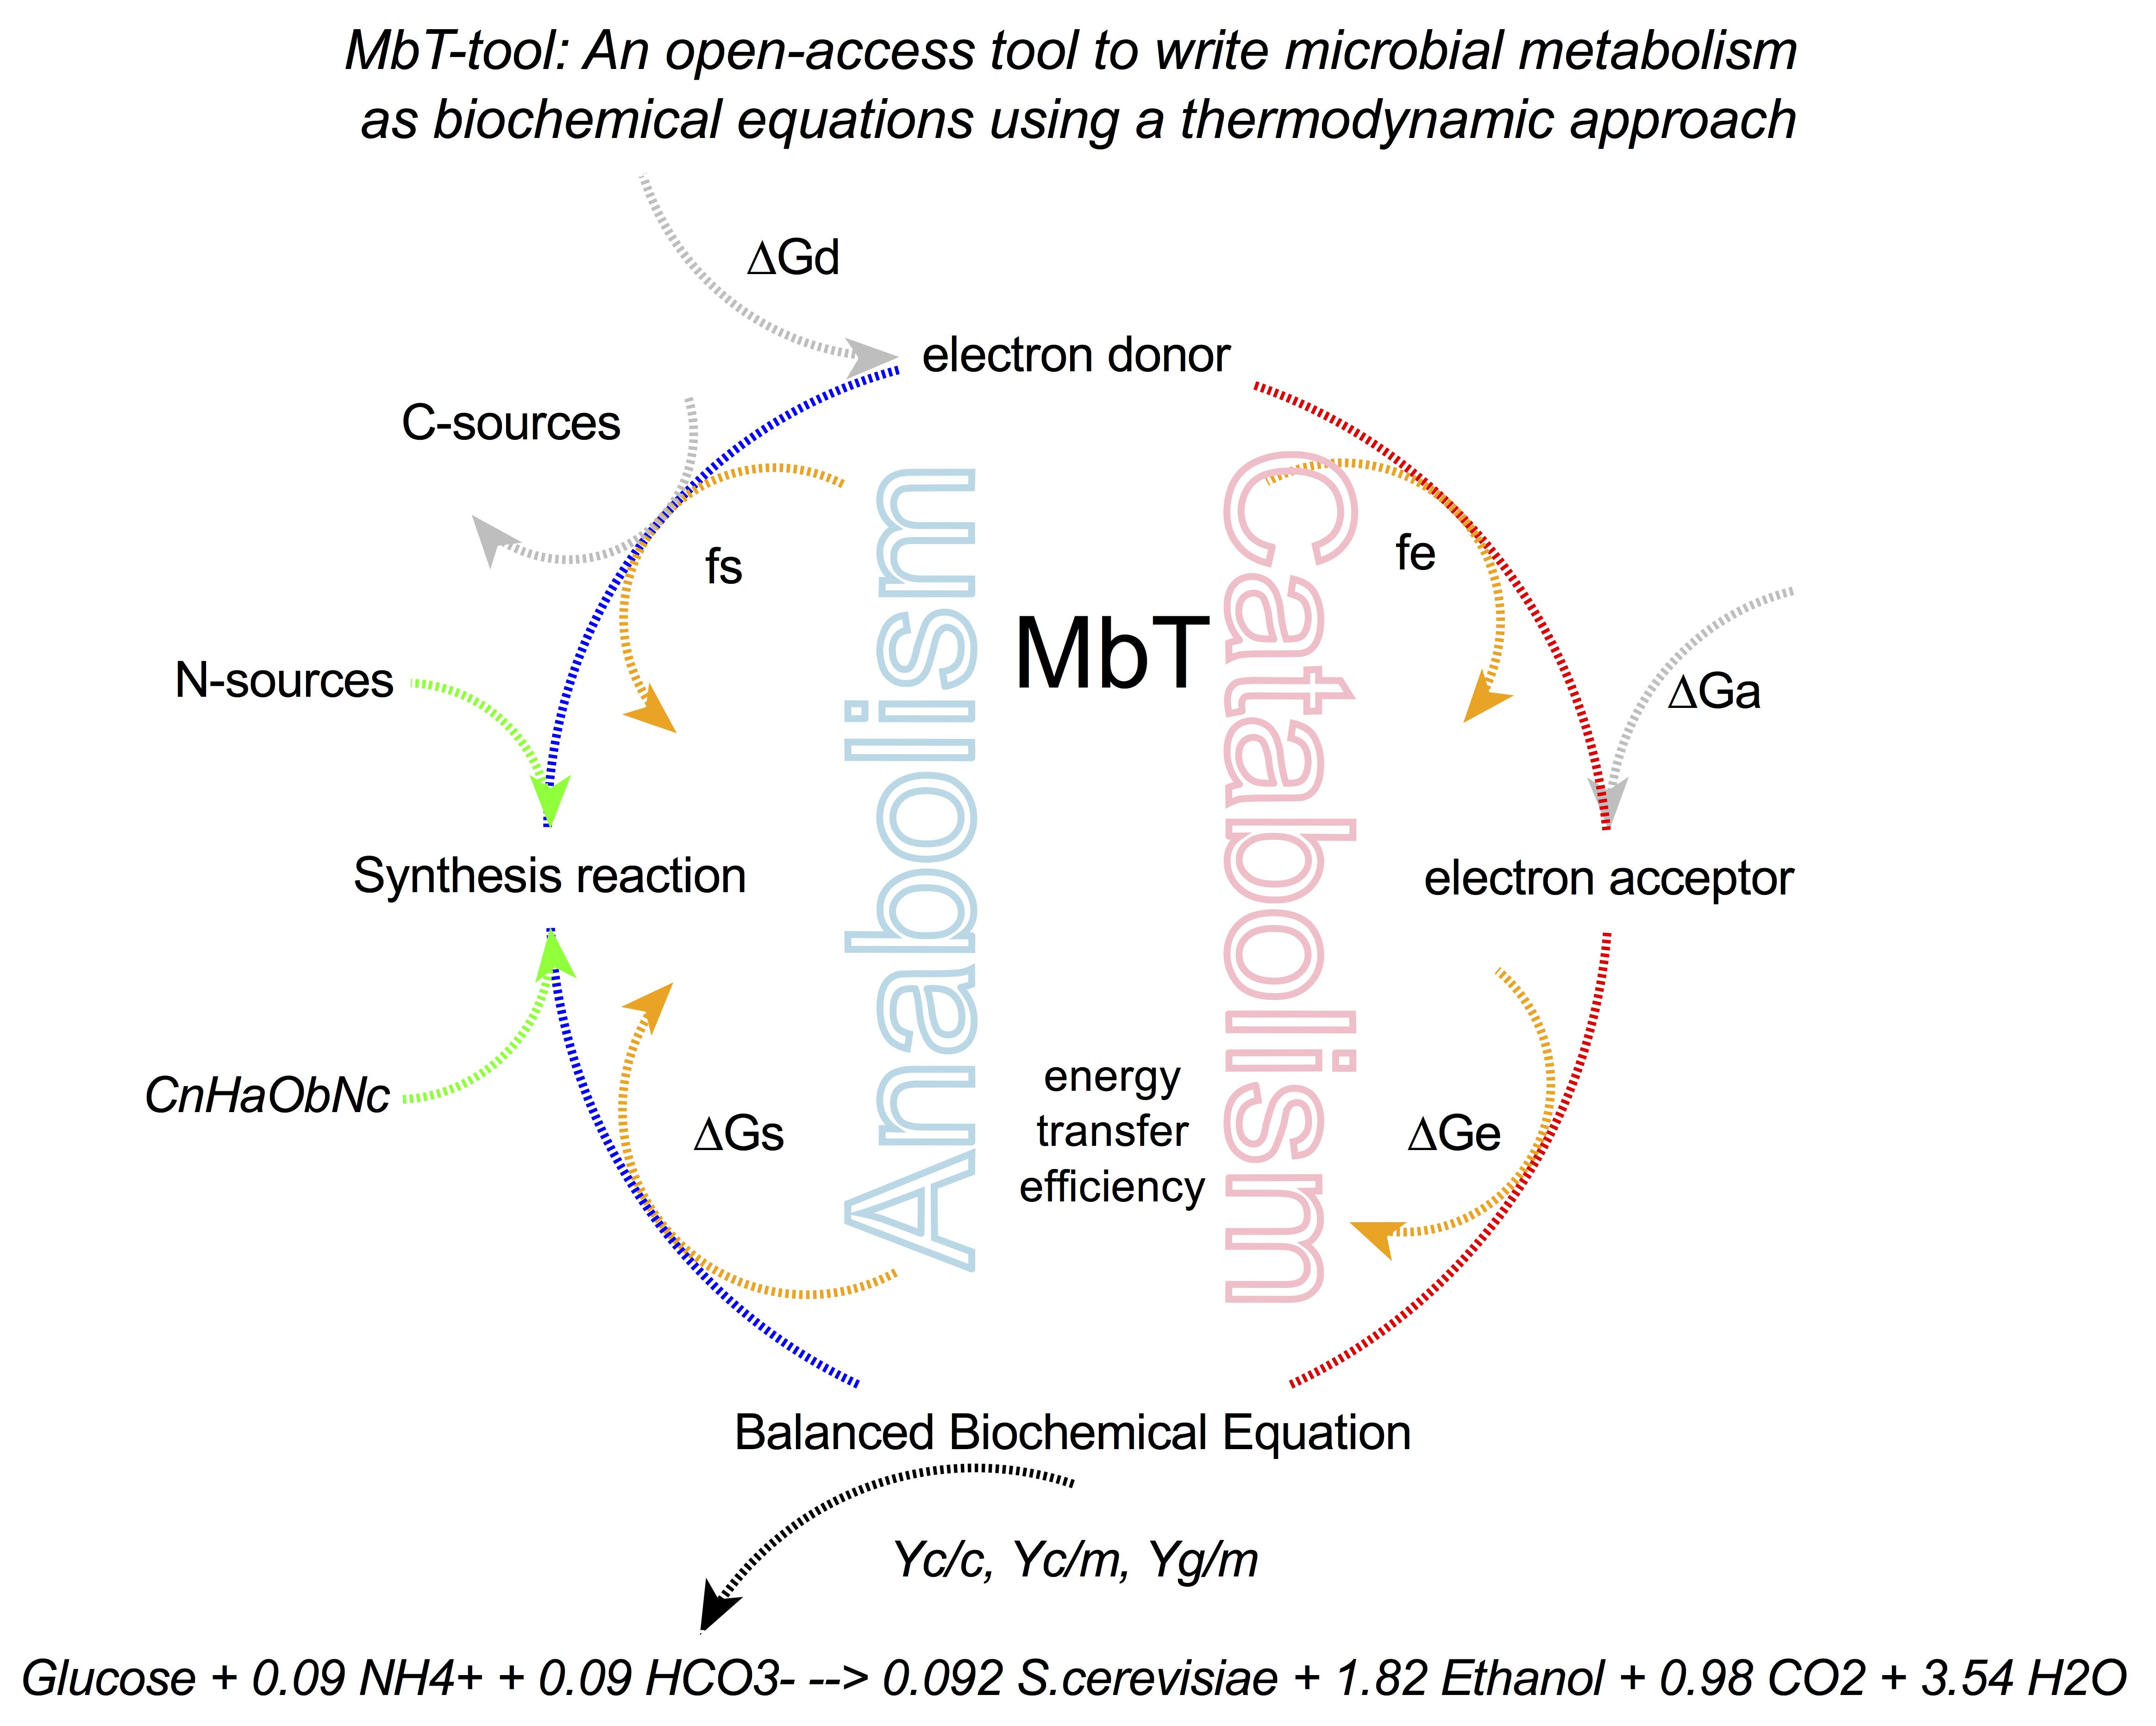 MbT-Tool: Metabolism based on Thermodynamics preview image